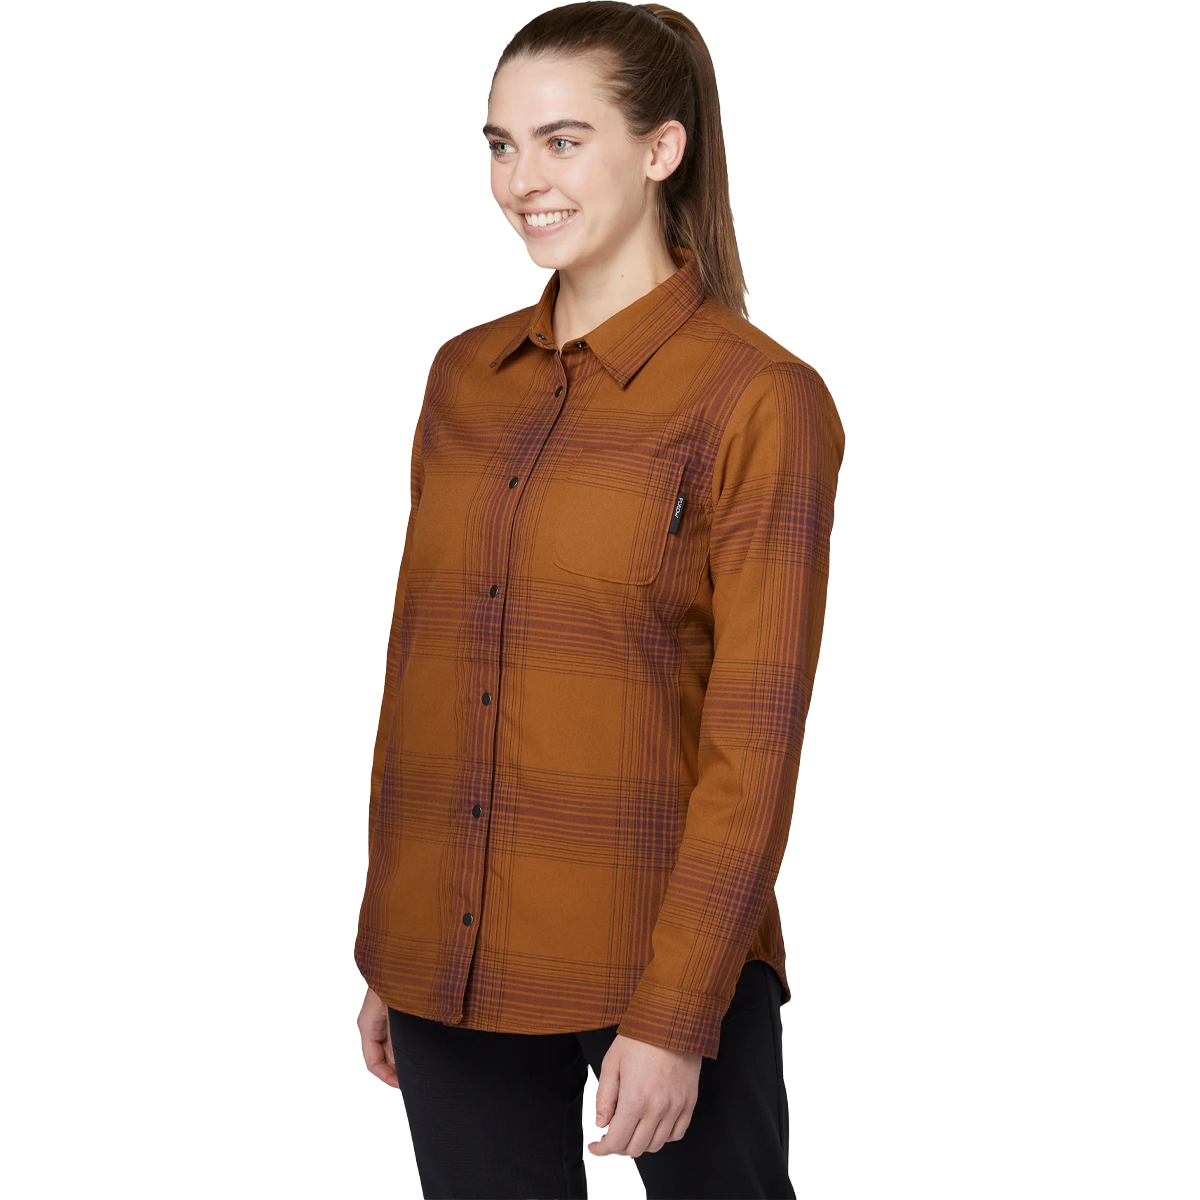 Women's Penny Insulated Flannel alternate view